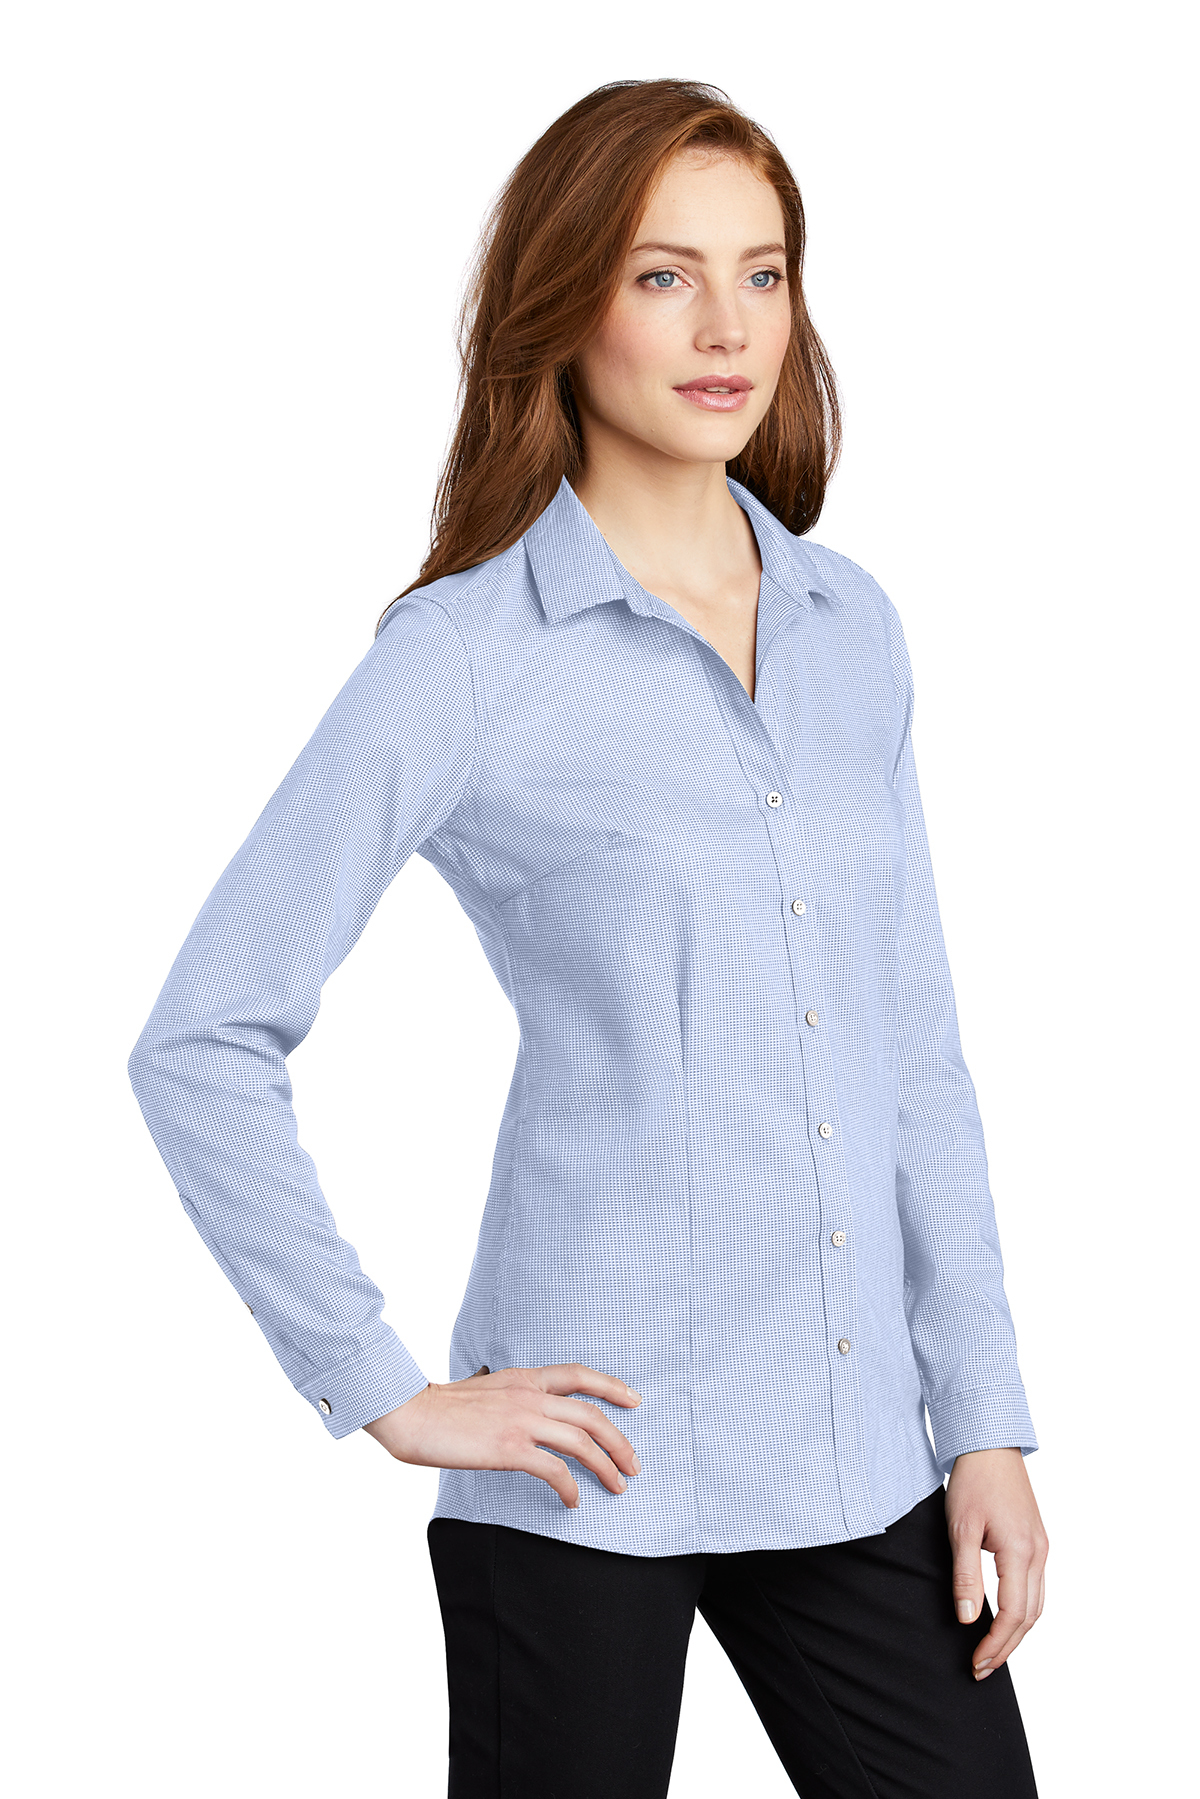 Port Authority Ladies Pincheck Easy Care Shirt | Product | SanMar